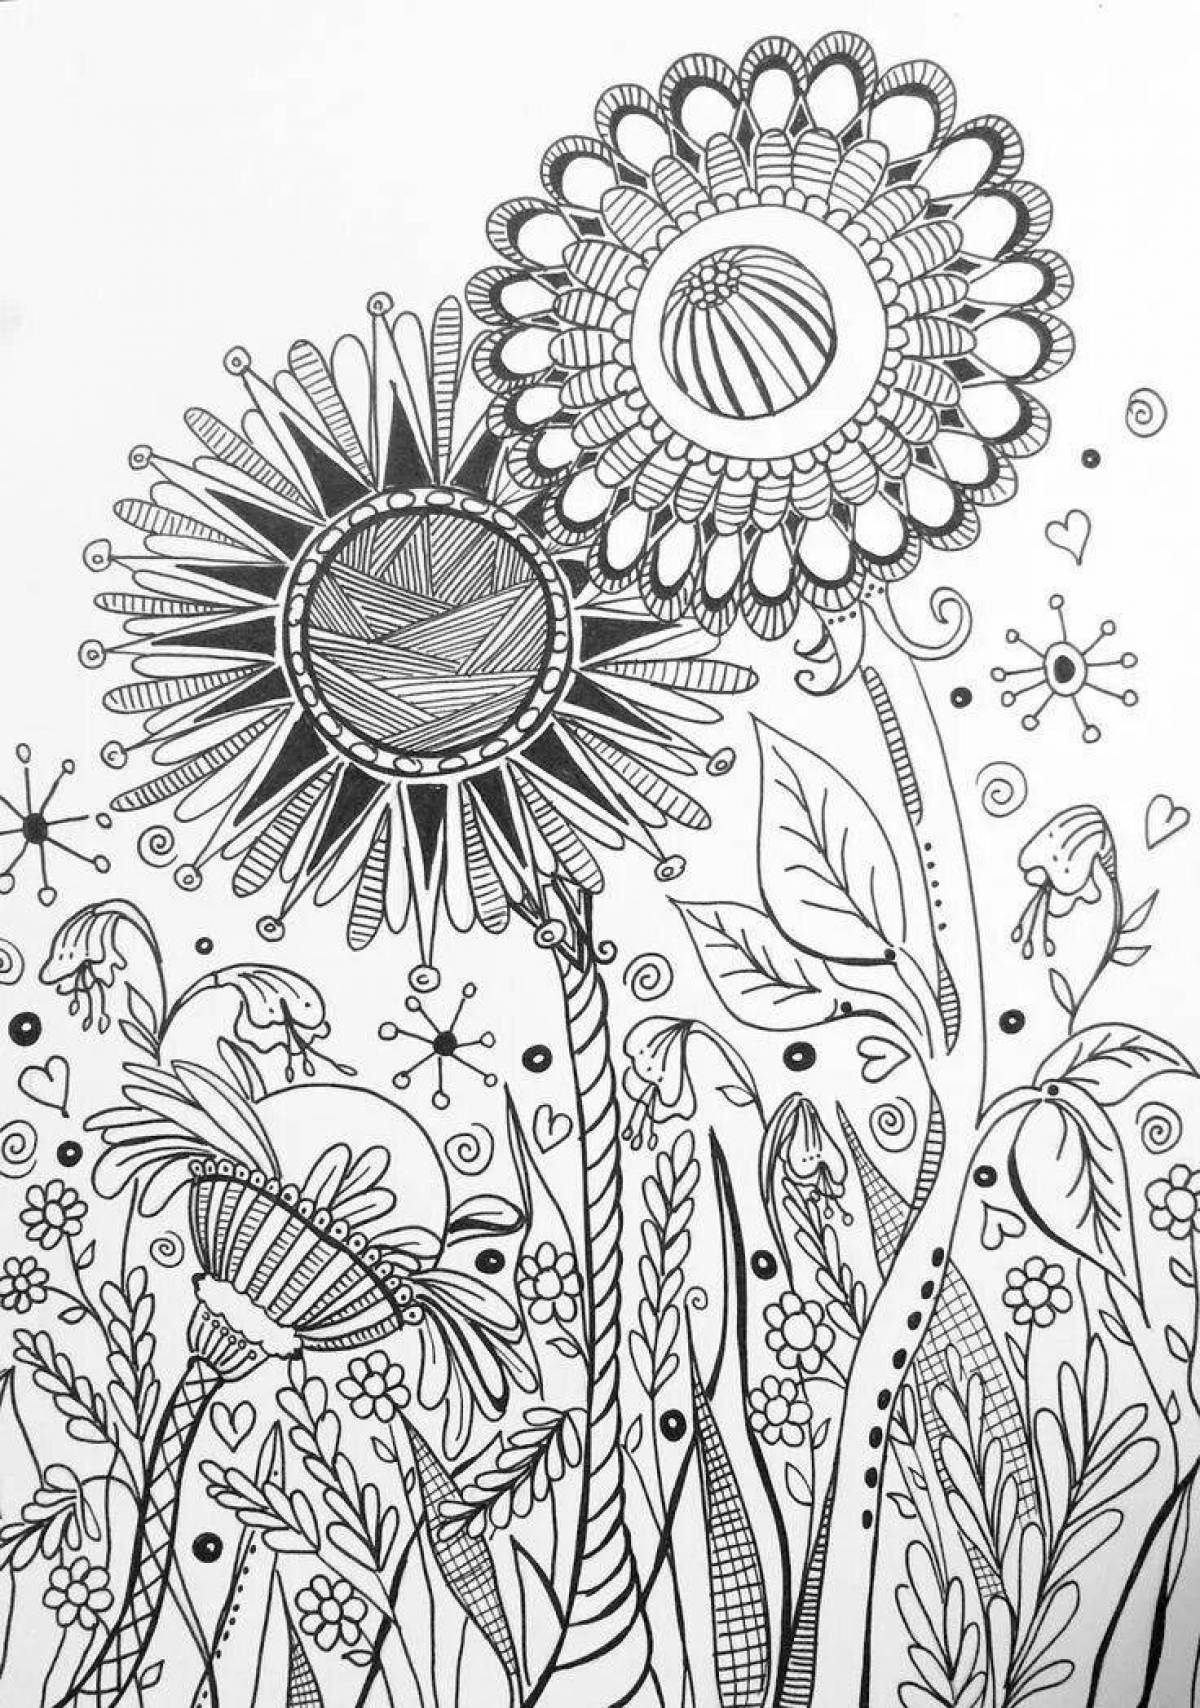 Coloring book great anti-stress art therapy